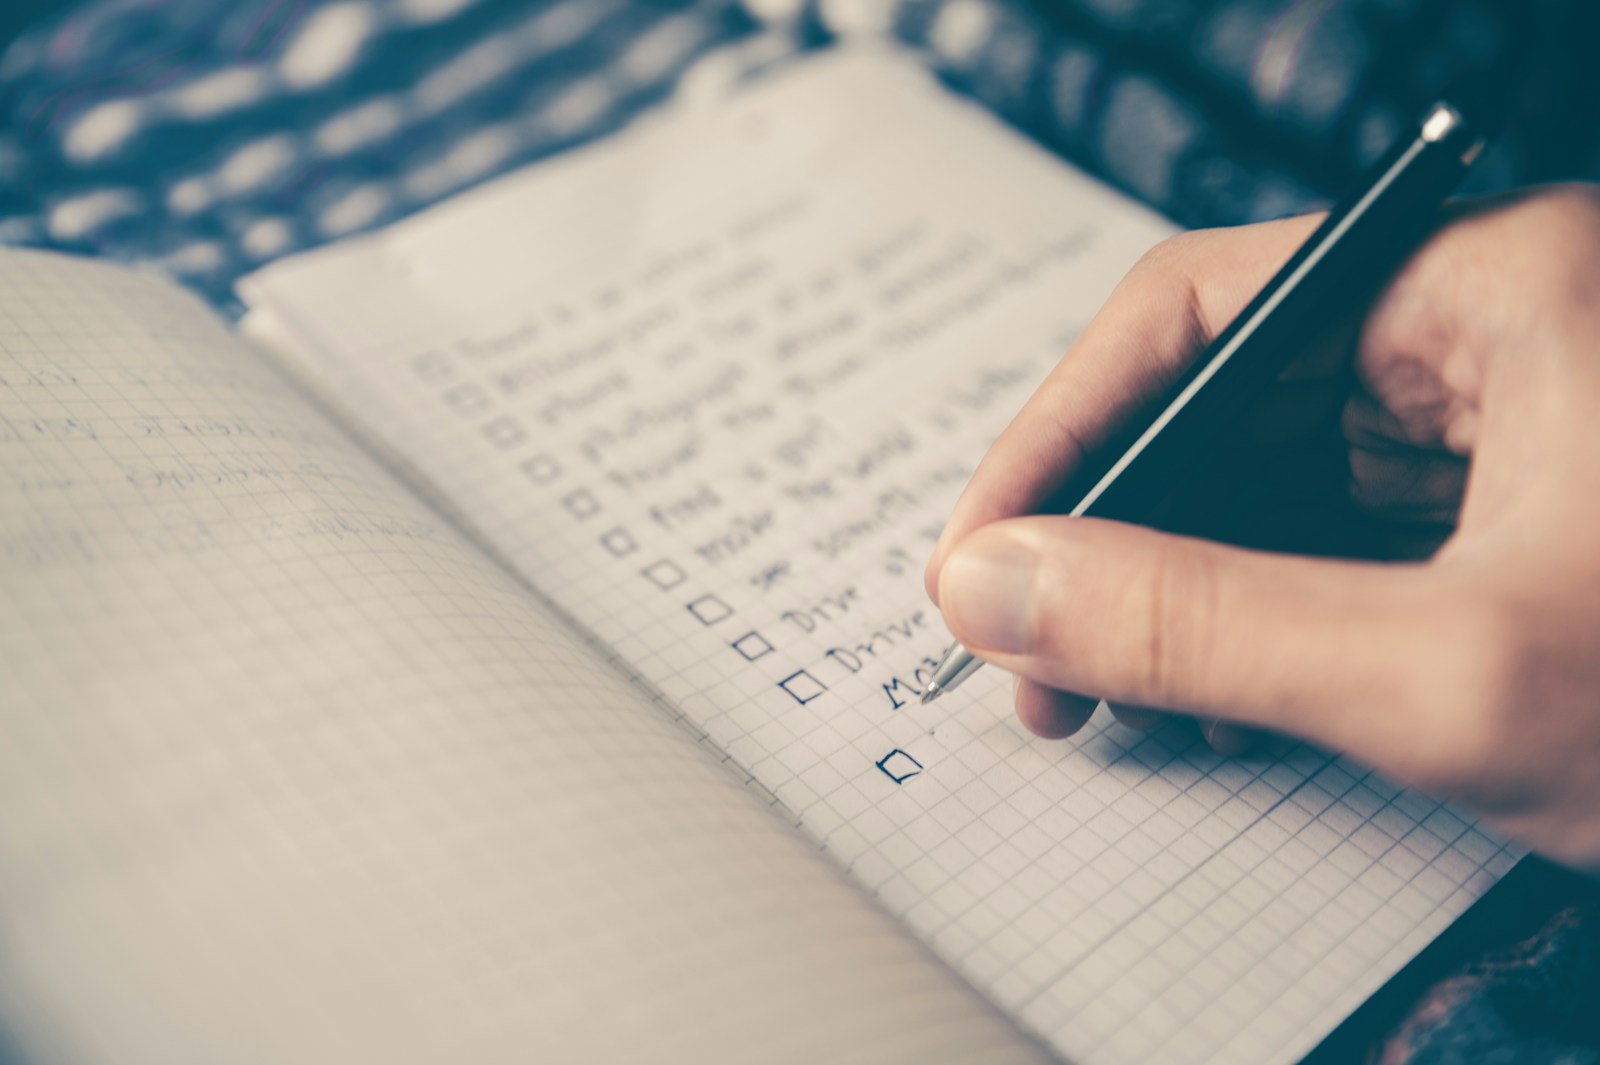 The Ultimate Product Launch Checklist: What Every Manager Needs to Know